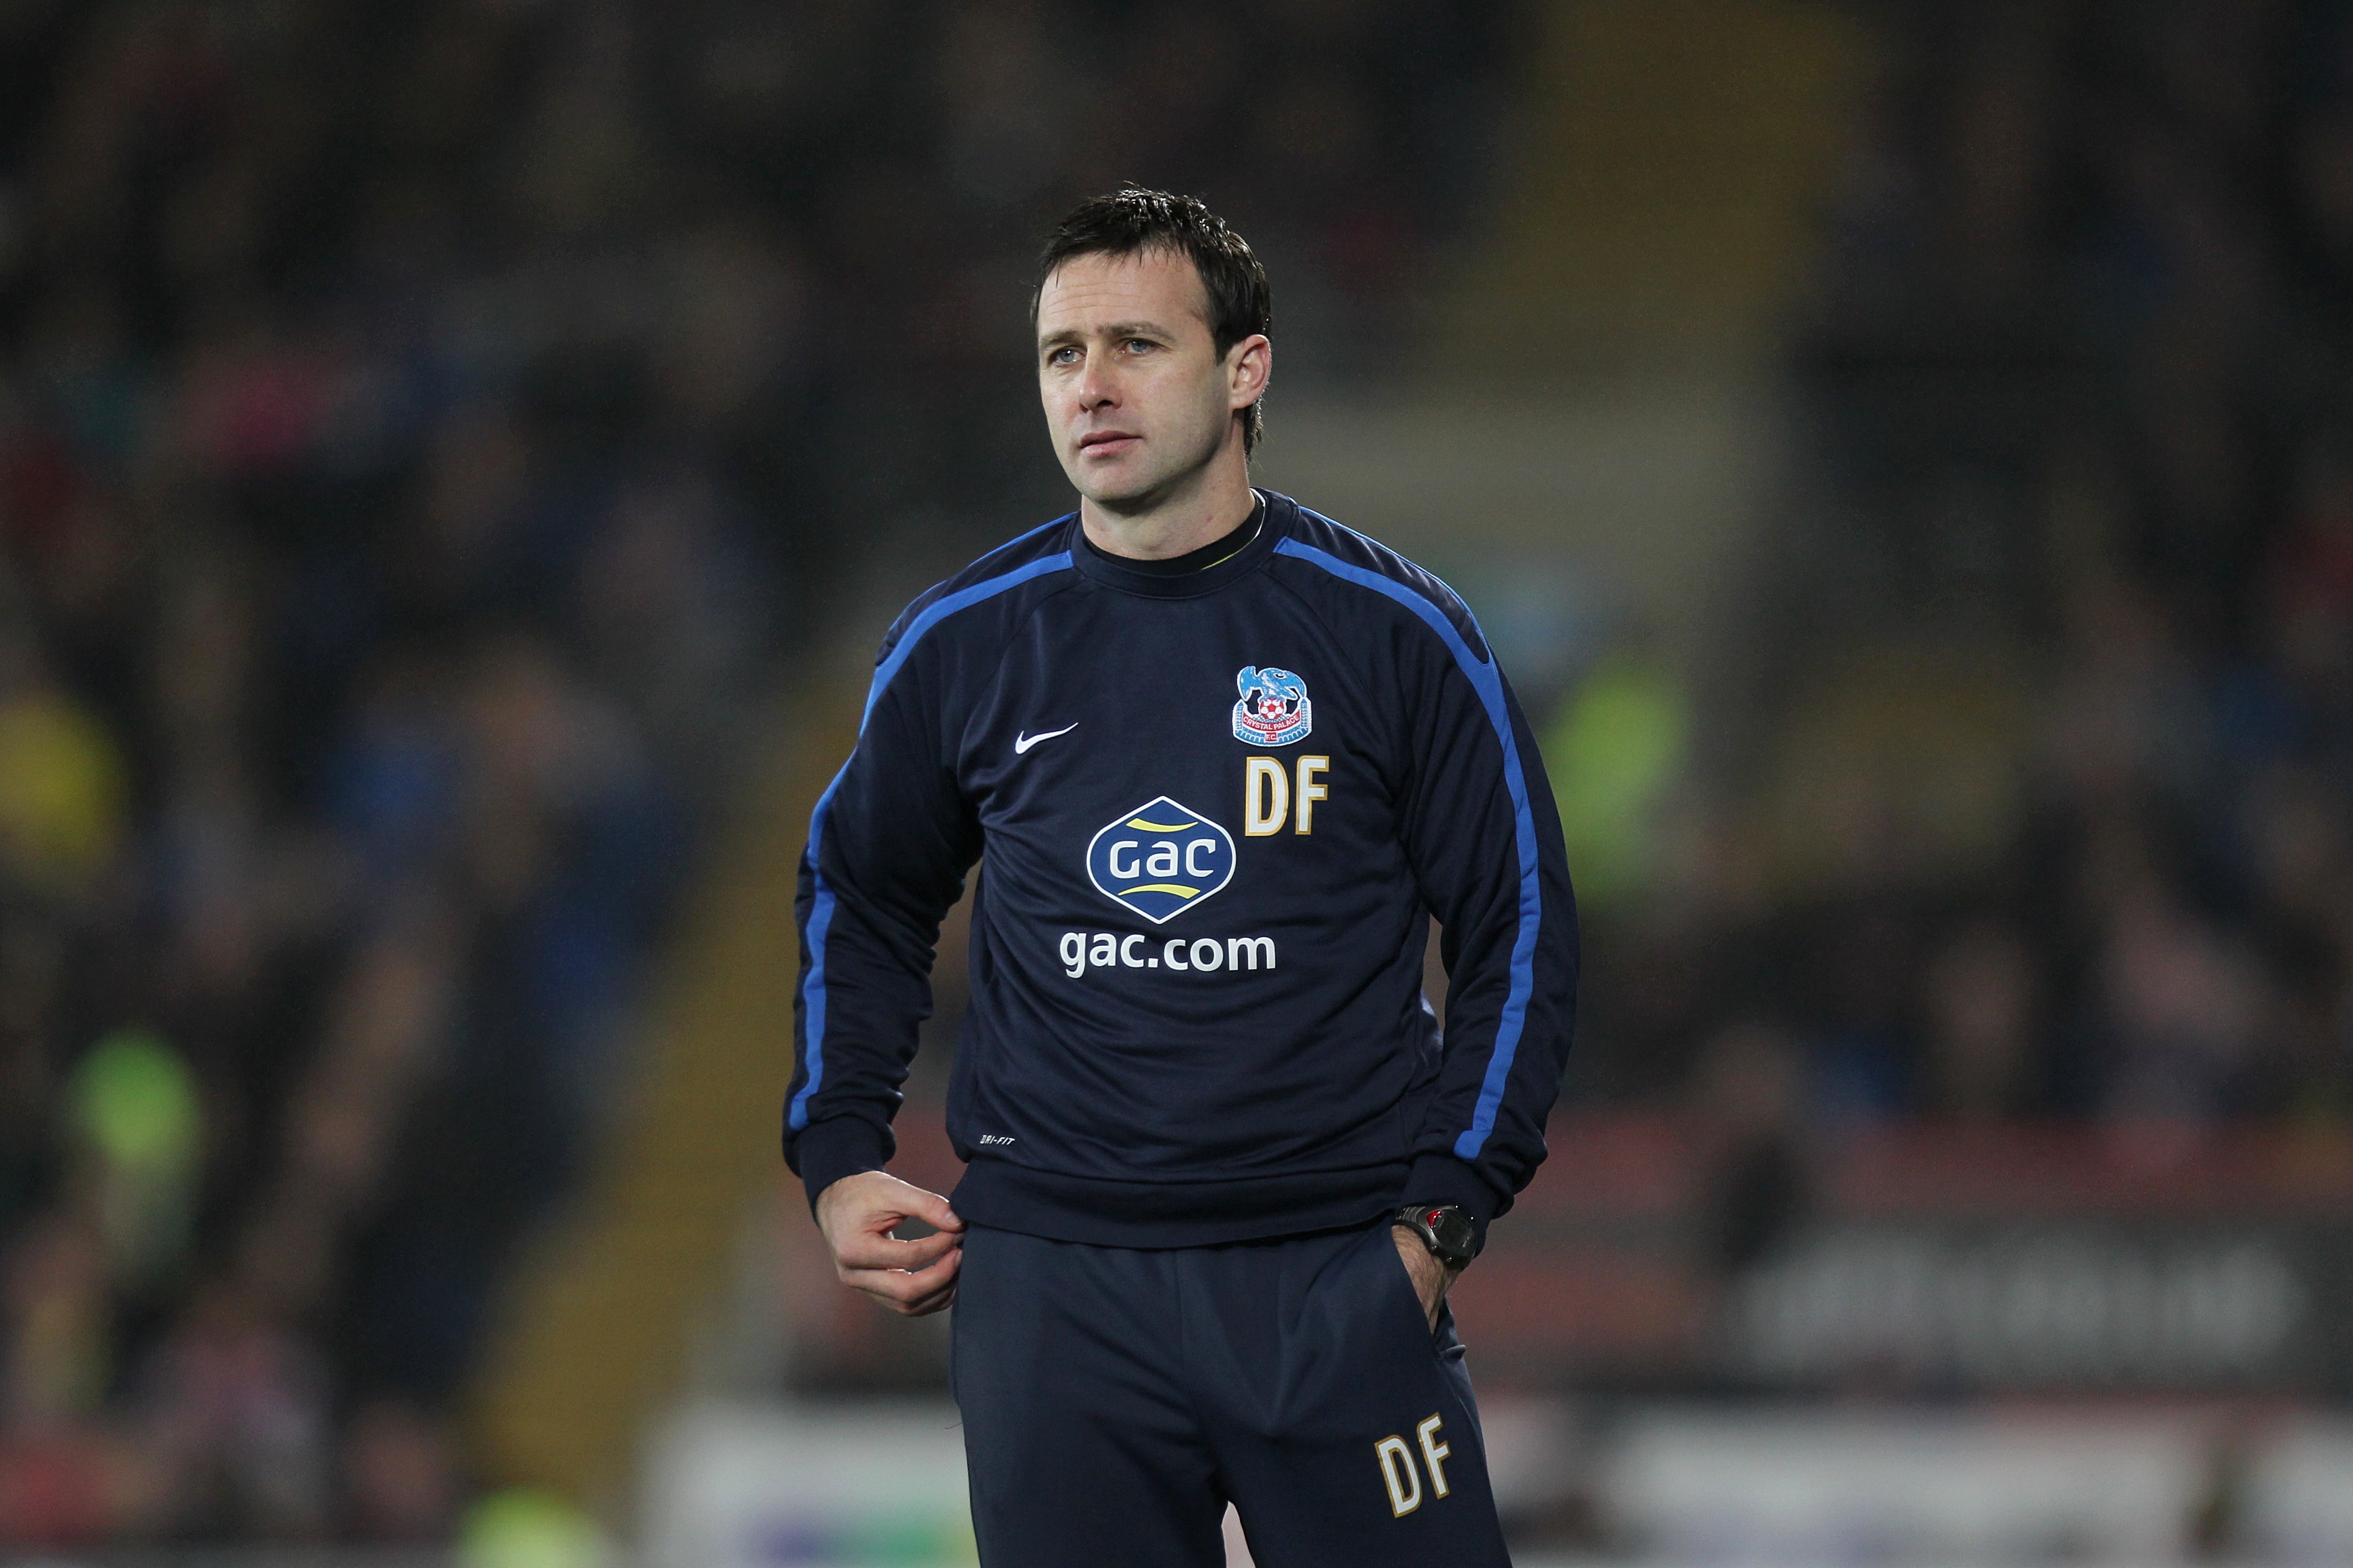 Dougie Freedman returned to Crystal Palace in 2017